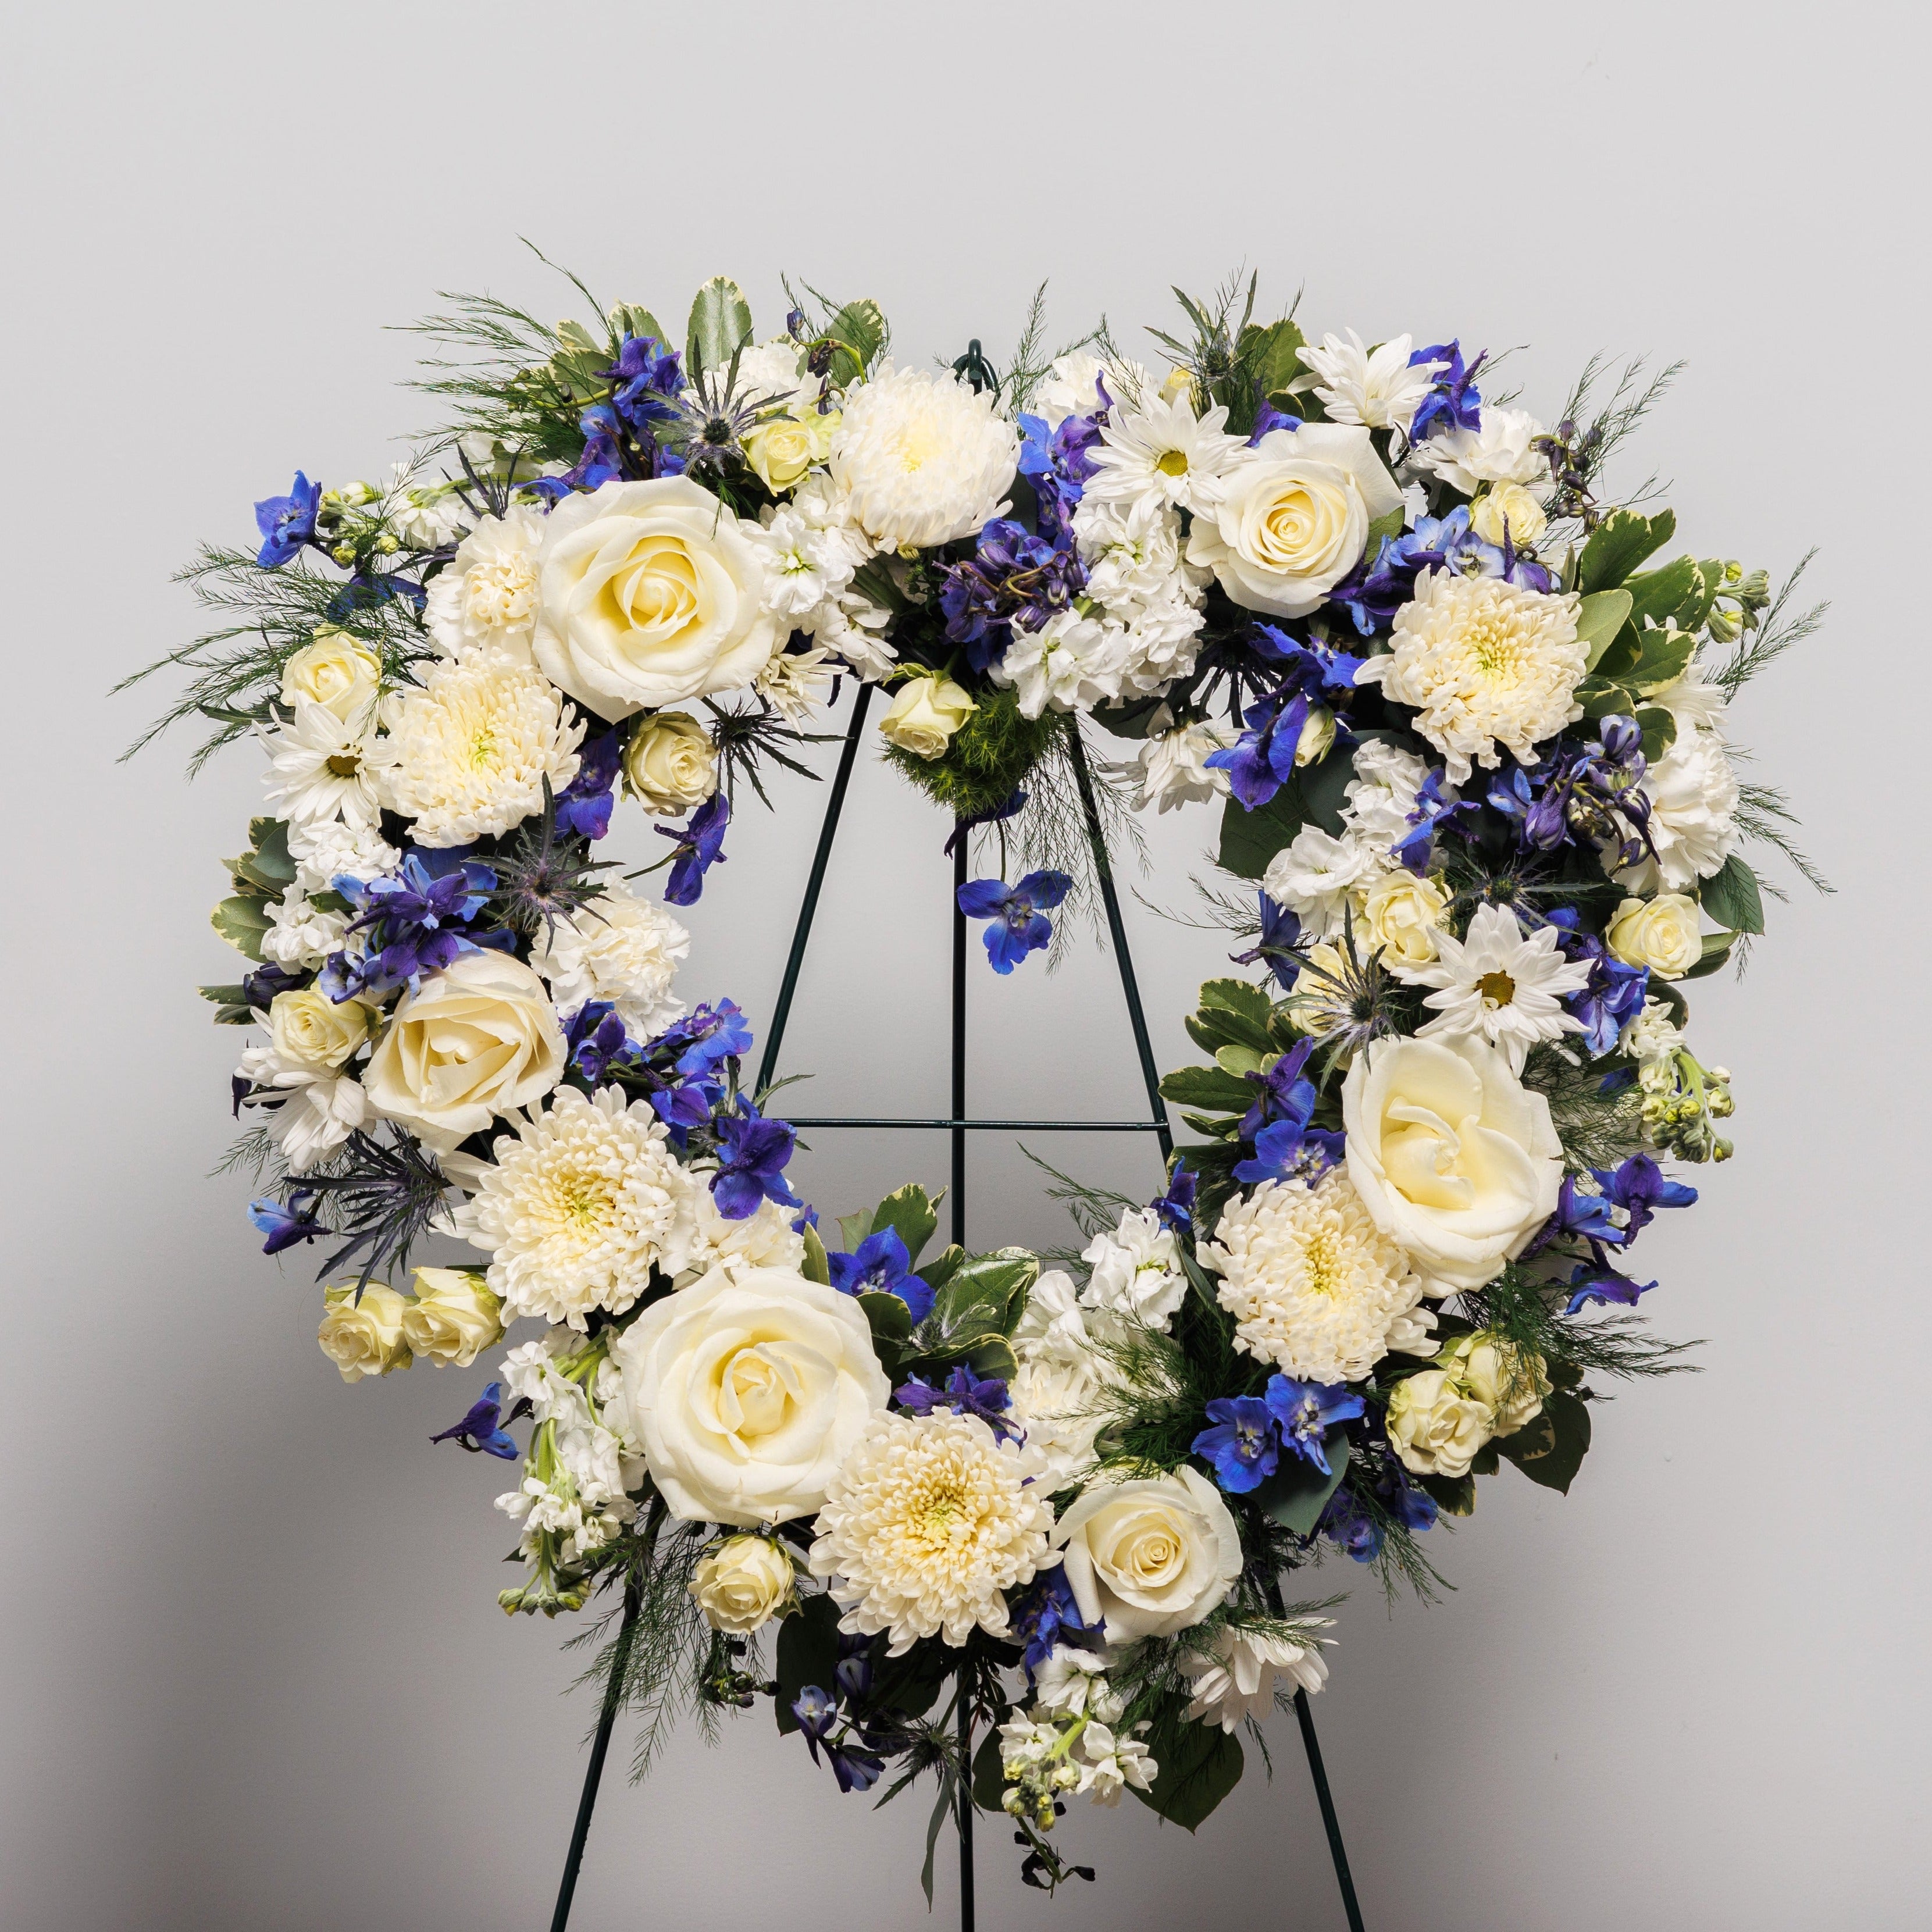 A standing heart spray with blue and white flowers.